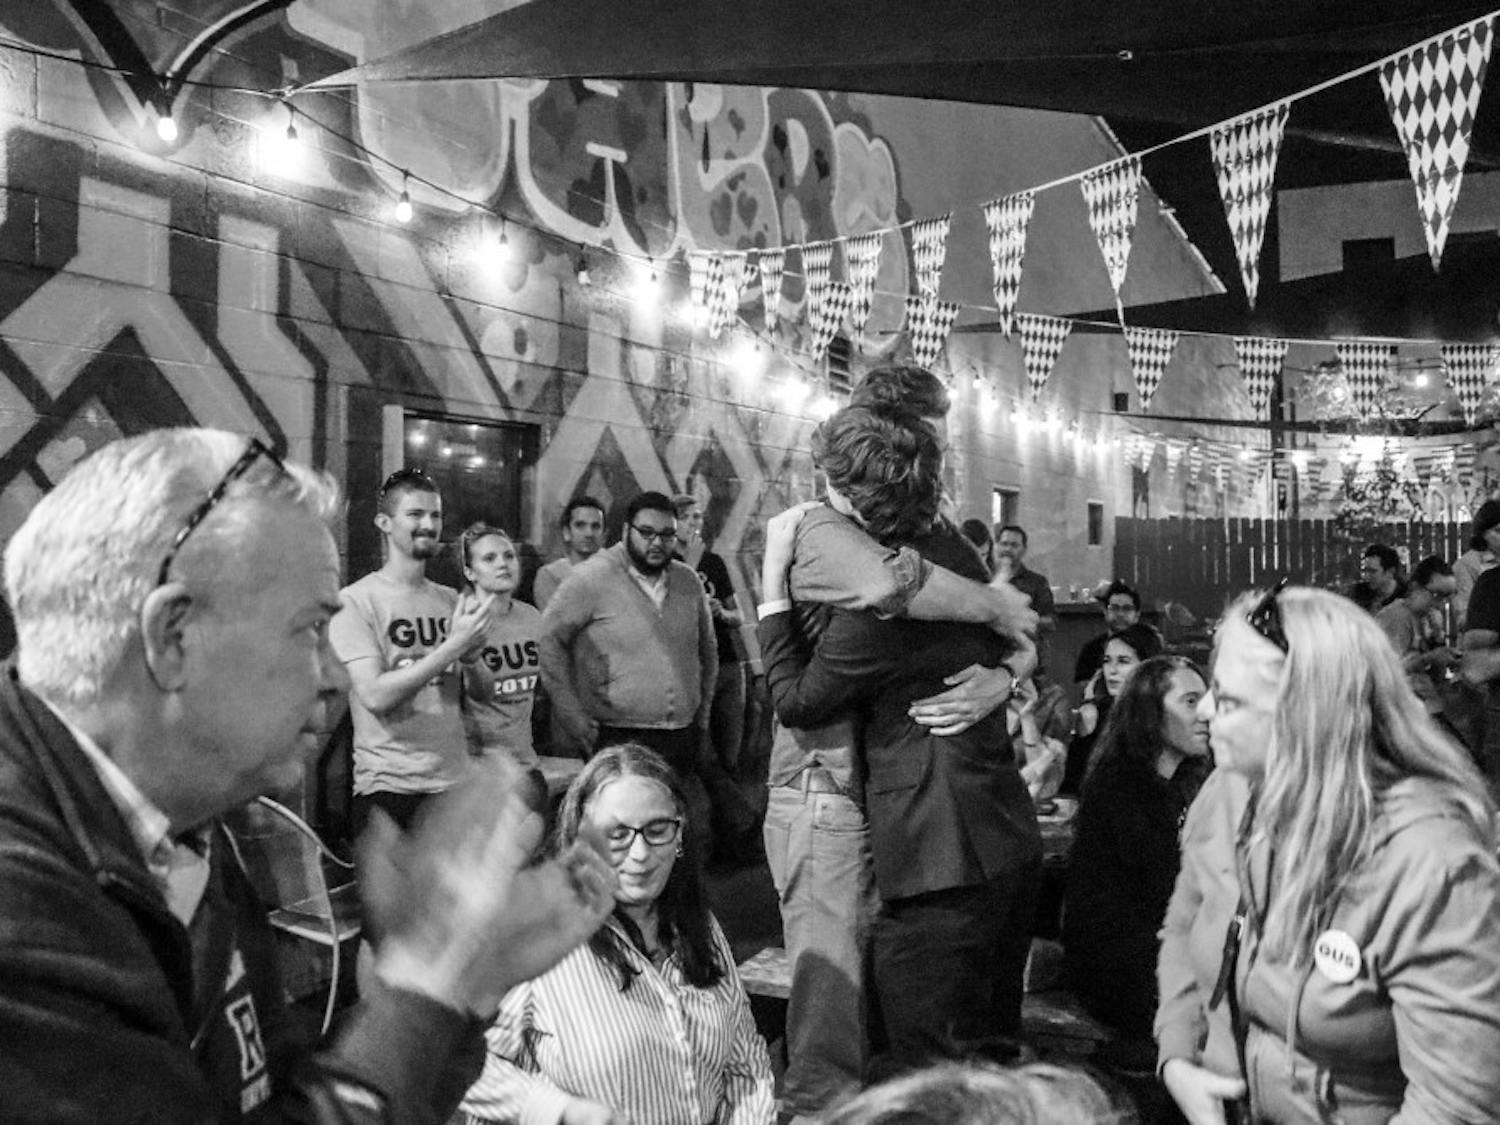 Mayoral candidate Gus Pedrotty embraces a supporter during his viewing party on Oct. 03, 2017. Gus will be running against the other candidates in November's 14 election after Tuesday nights runoff results.